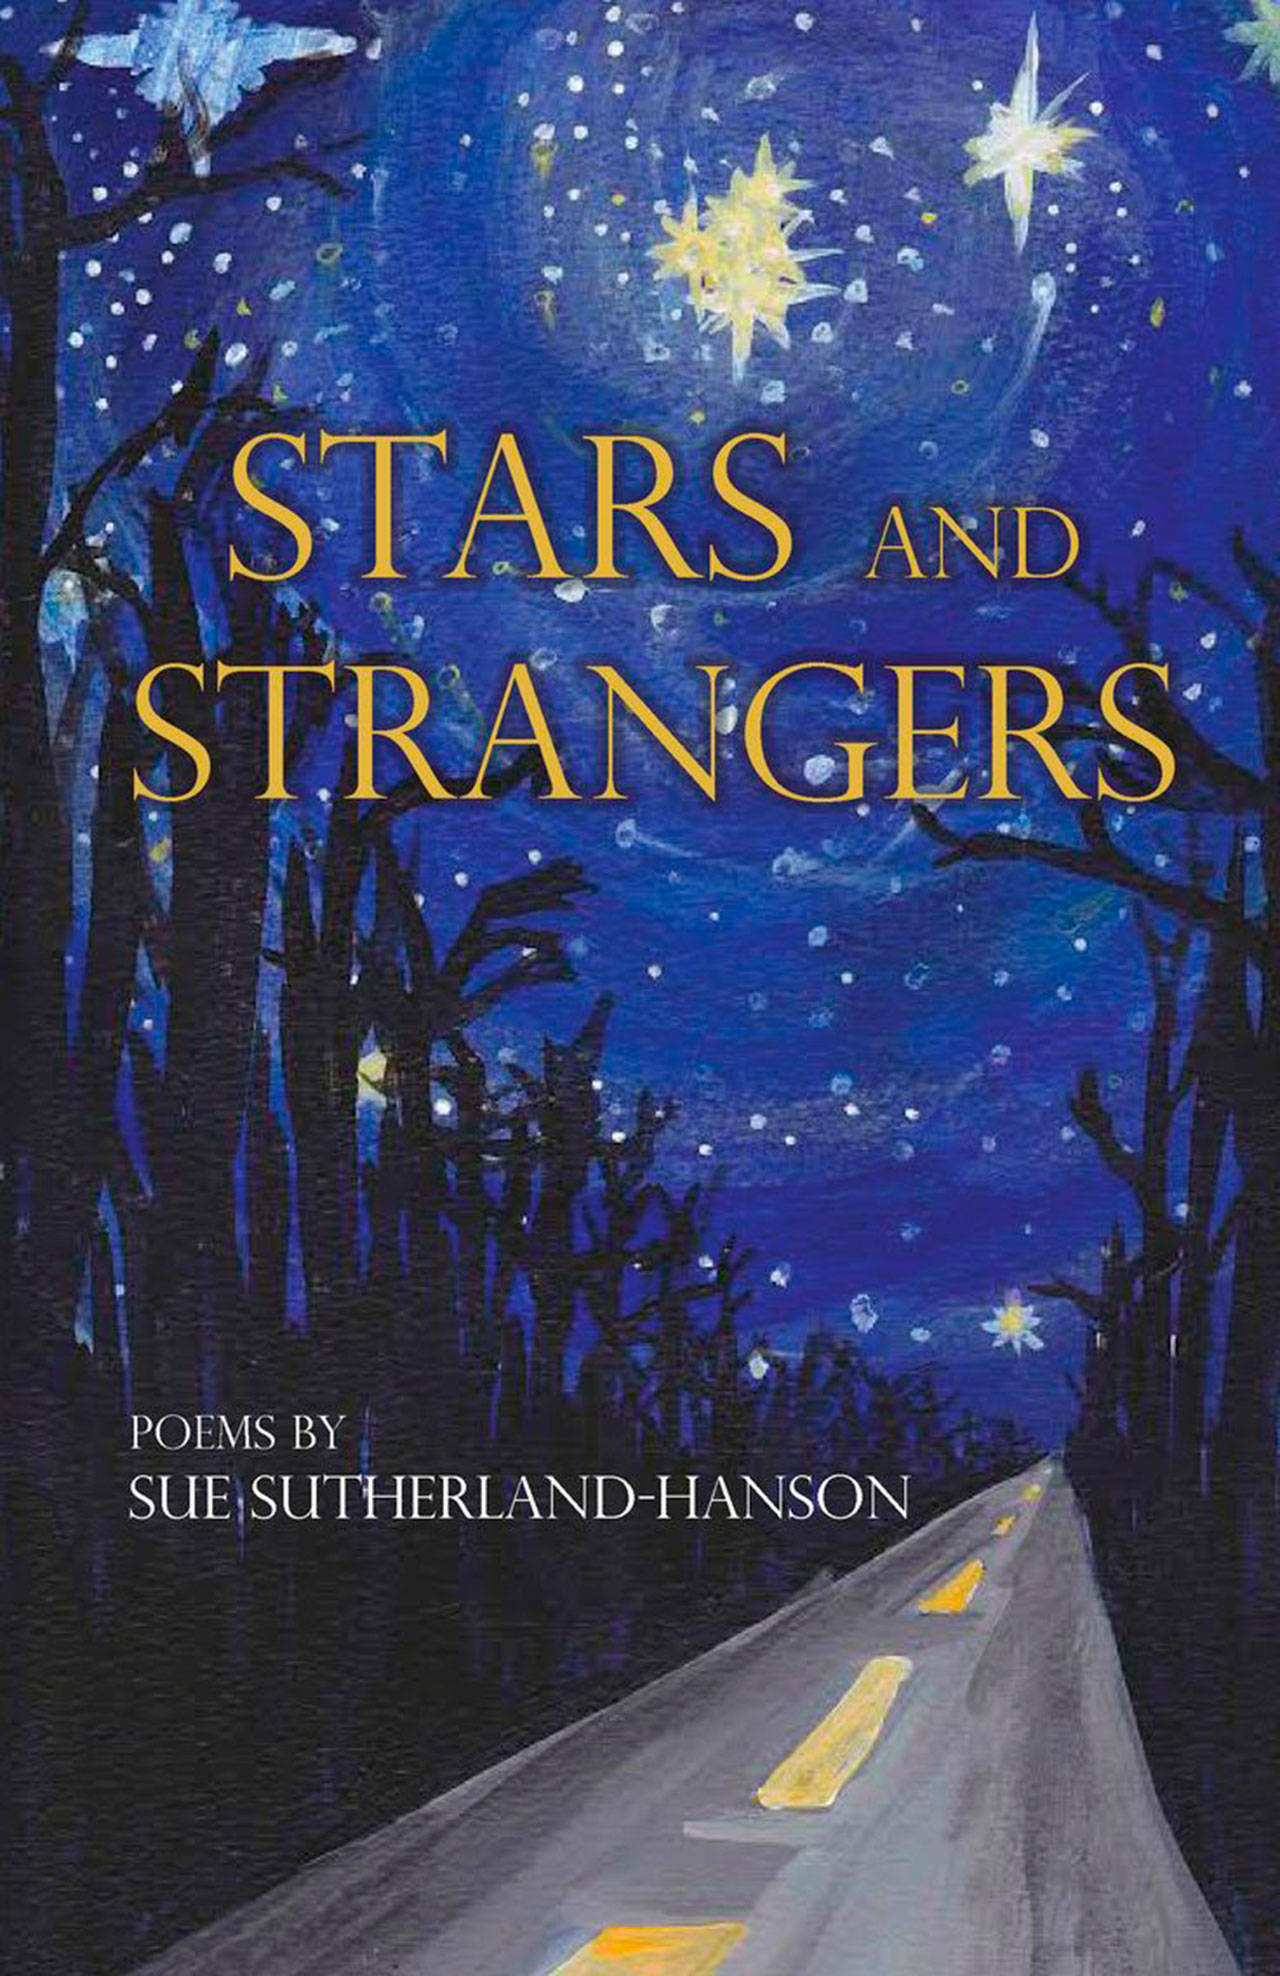 Image courtesy of Eagle Harbor Book Company | Kitsap author Sue Sutherland-Hanson will visit Eagle Harbor Book Company to discuss her new poetry collection “Stars and Strangers” at 6:30 p.m. Thursday, March 9.